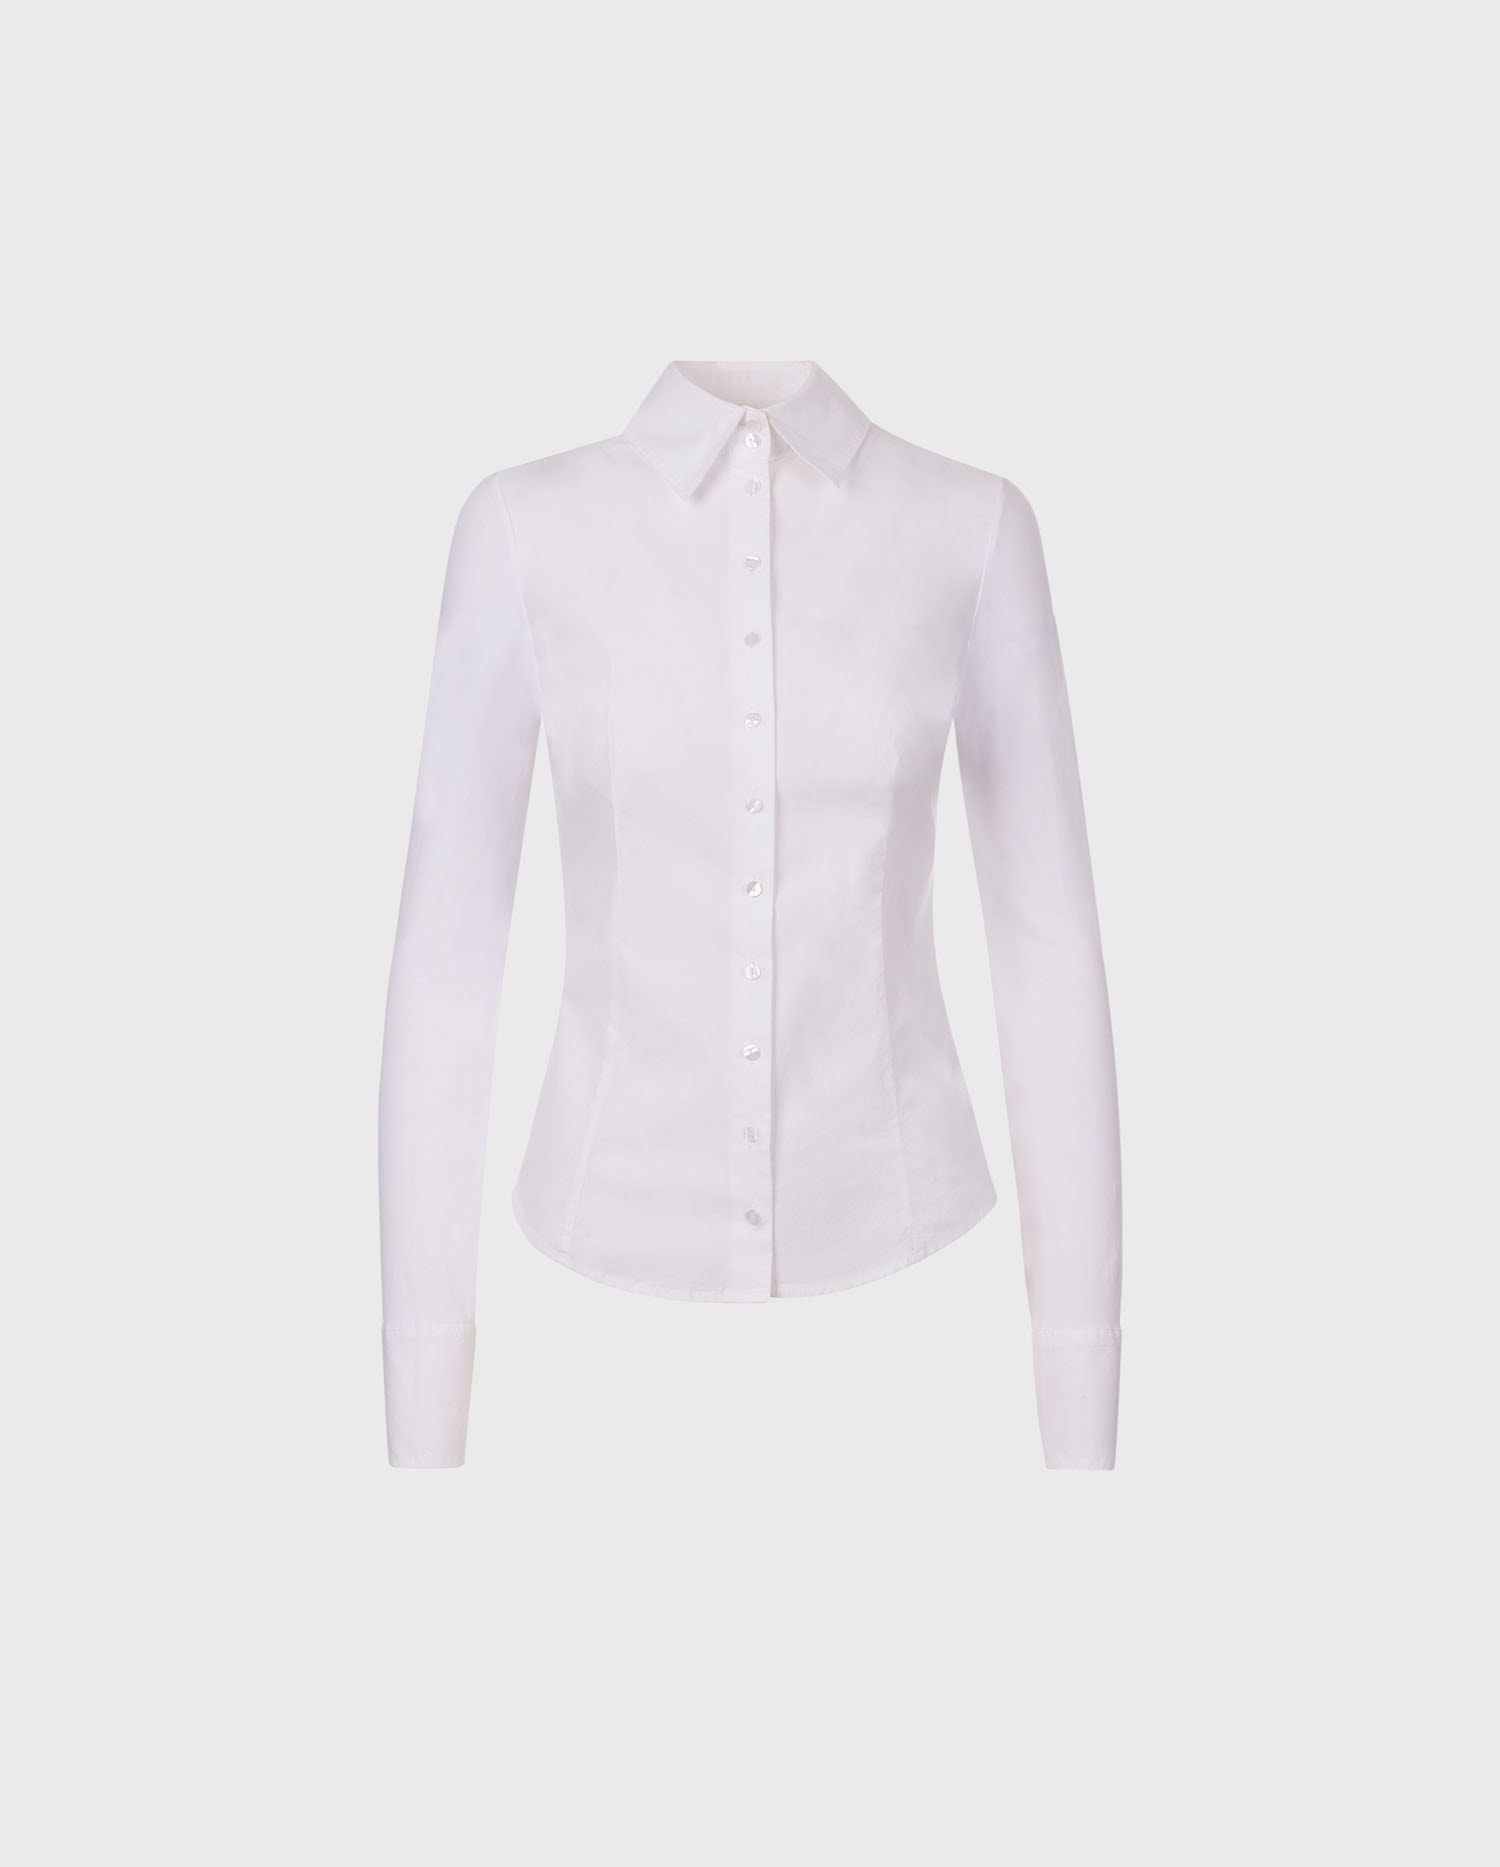 Explore the AMANTINE fitted and tailored white cotton button down shirt from designer ANNE FONTAINE